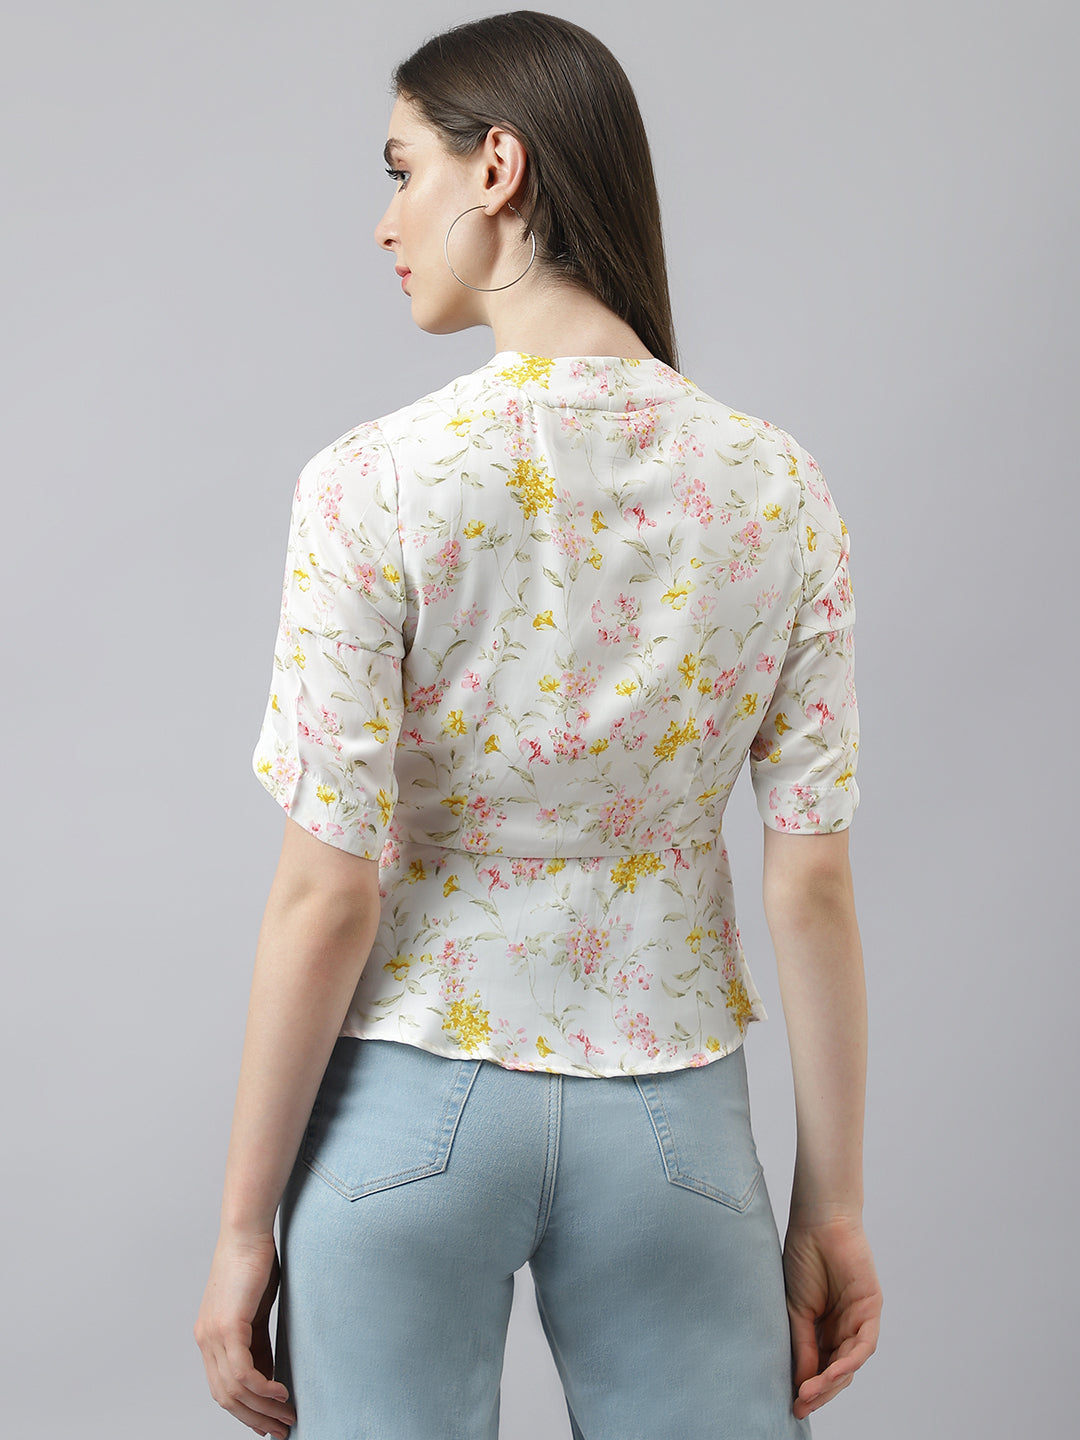 Ivory Floral Print Peplum Top With Puffer Sleeves & V Neckline